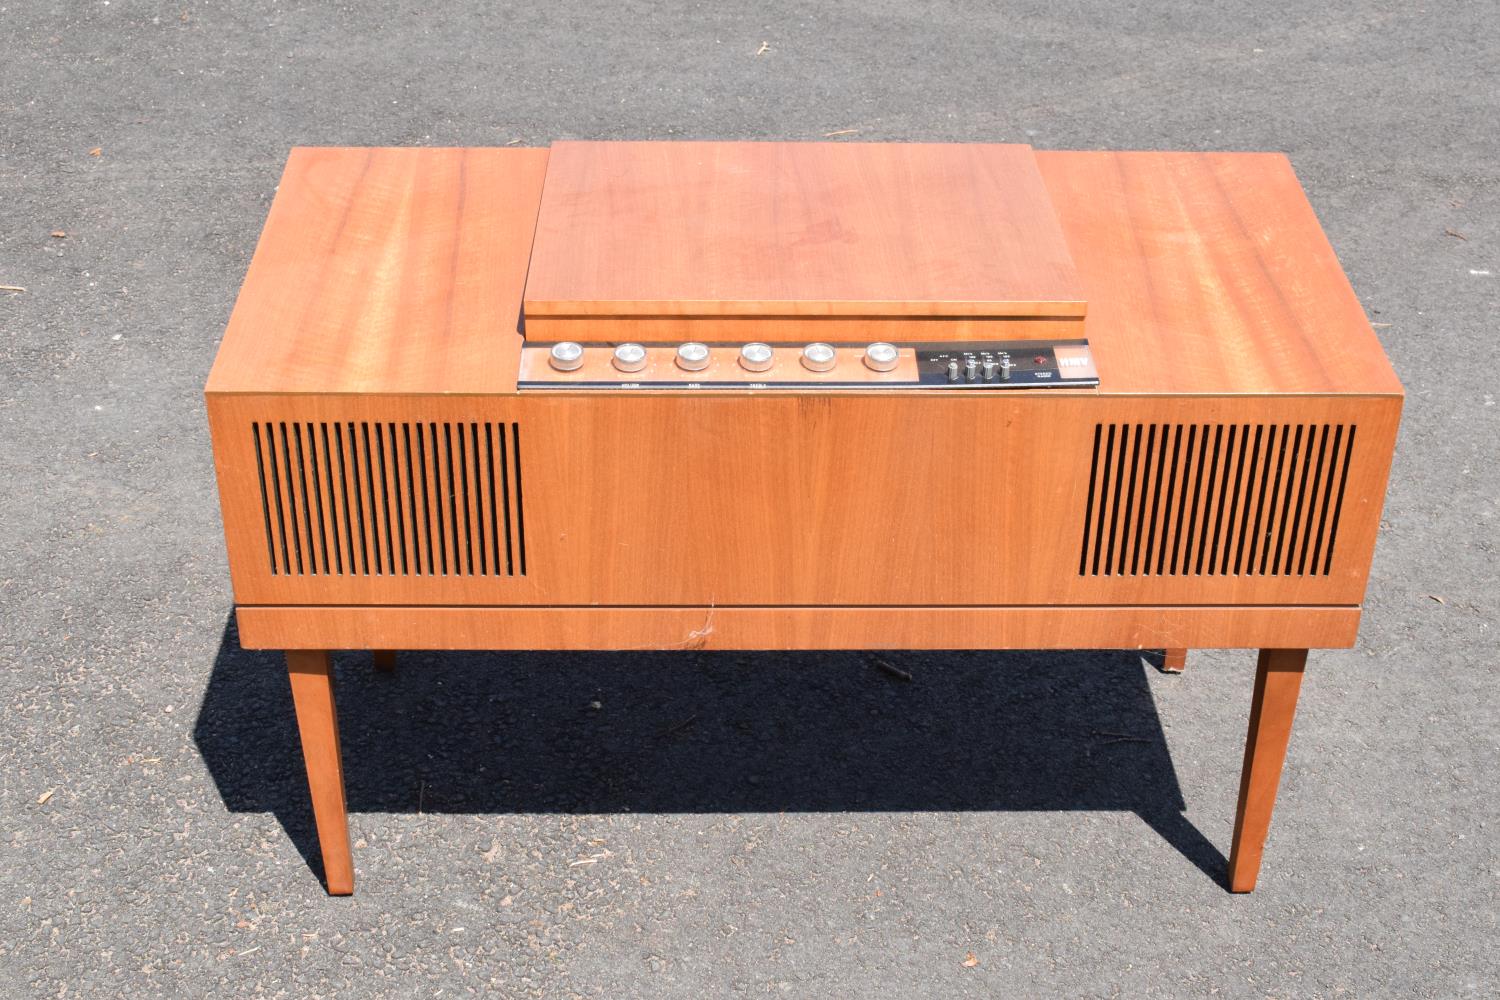 HMV teak radiogram unit. 96 x 44 x 60cm. In good condition with signs of age-related wear and